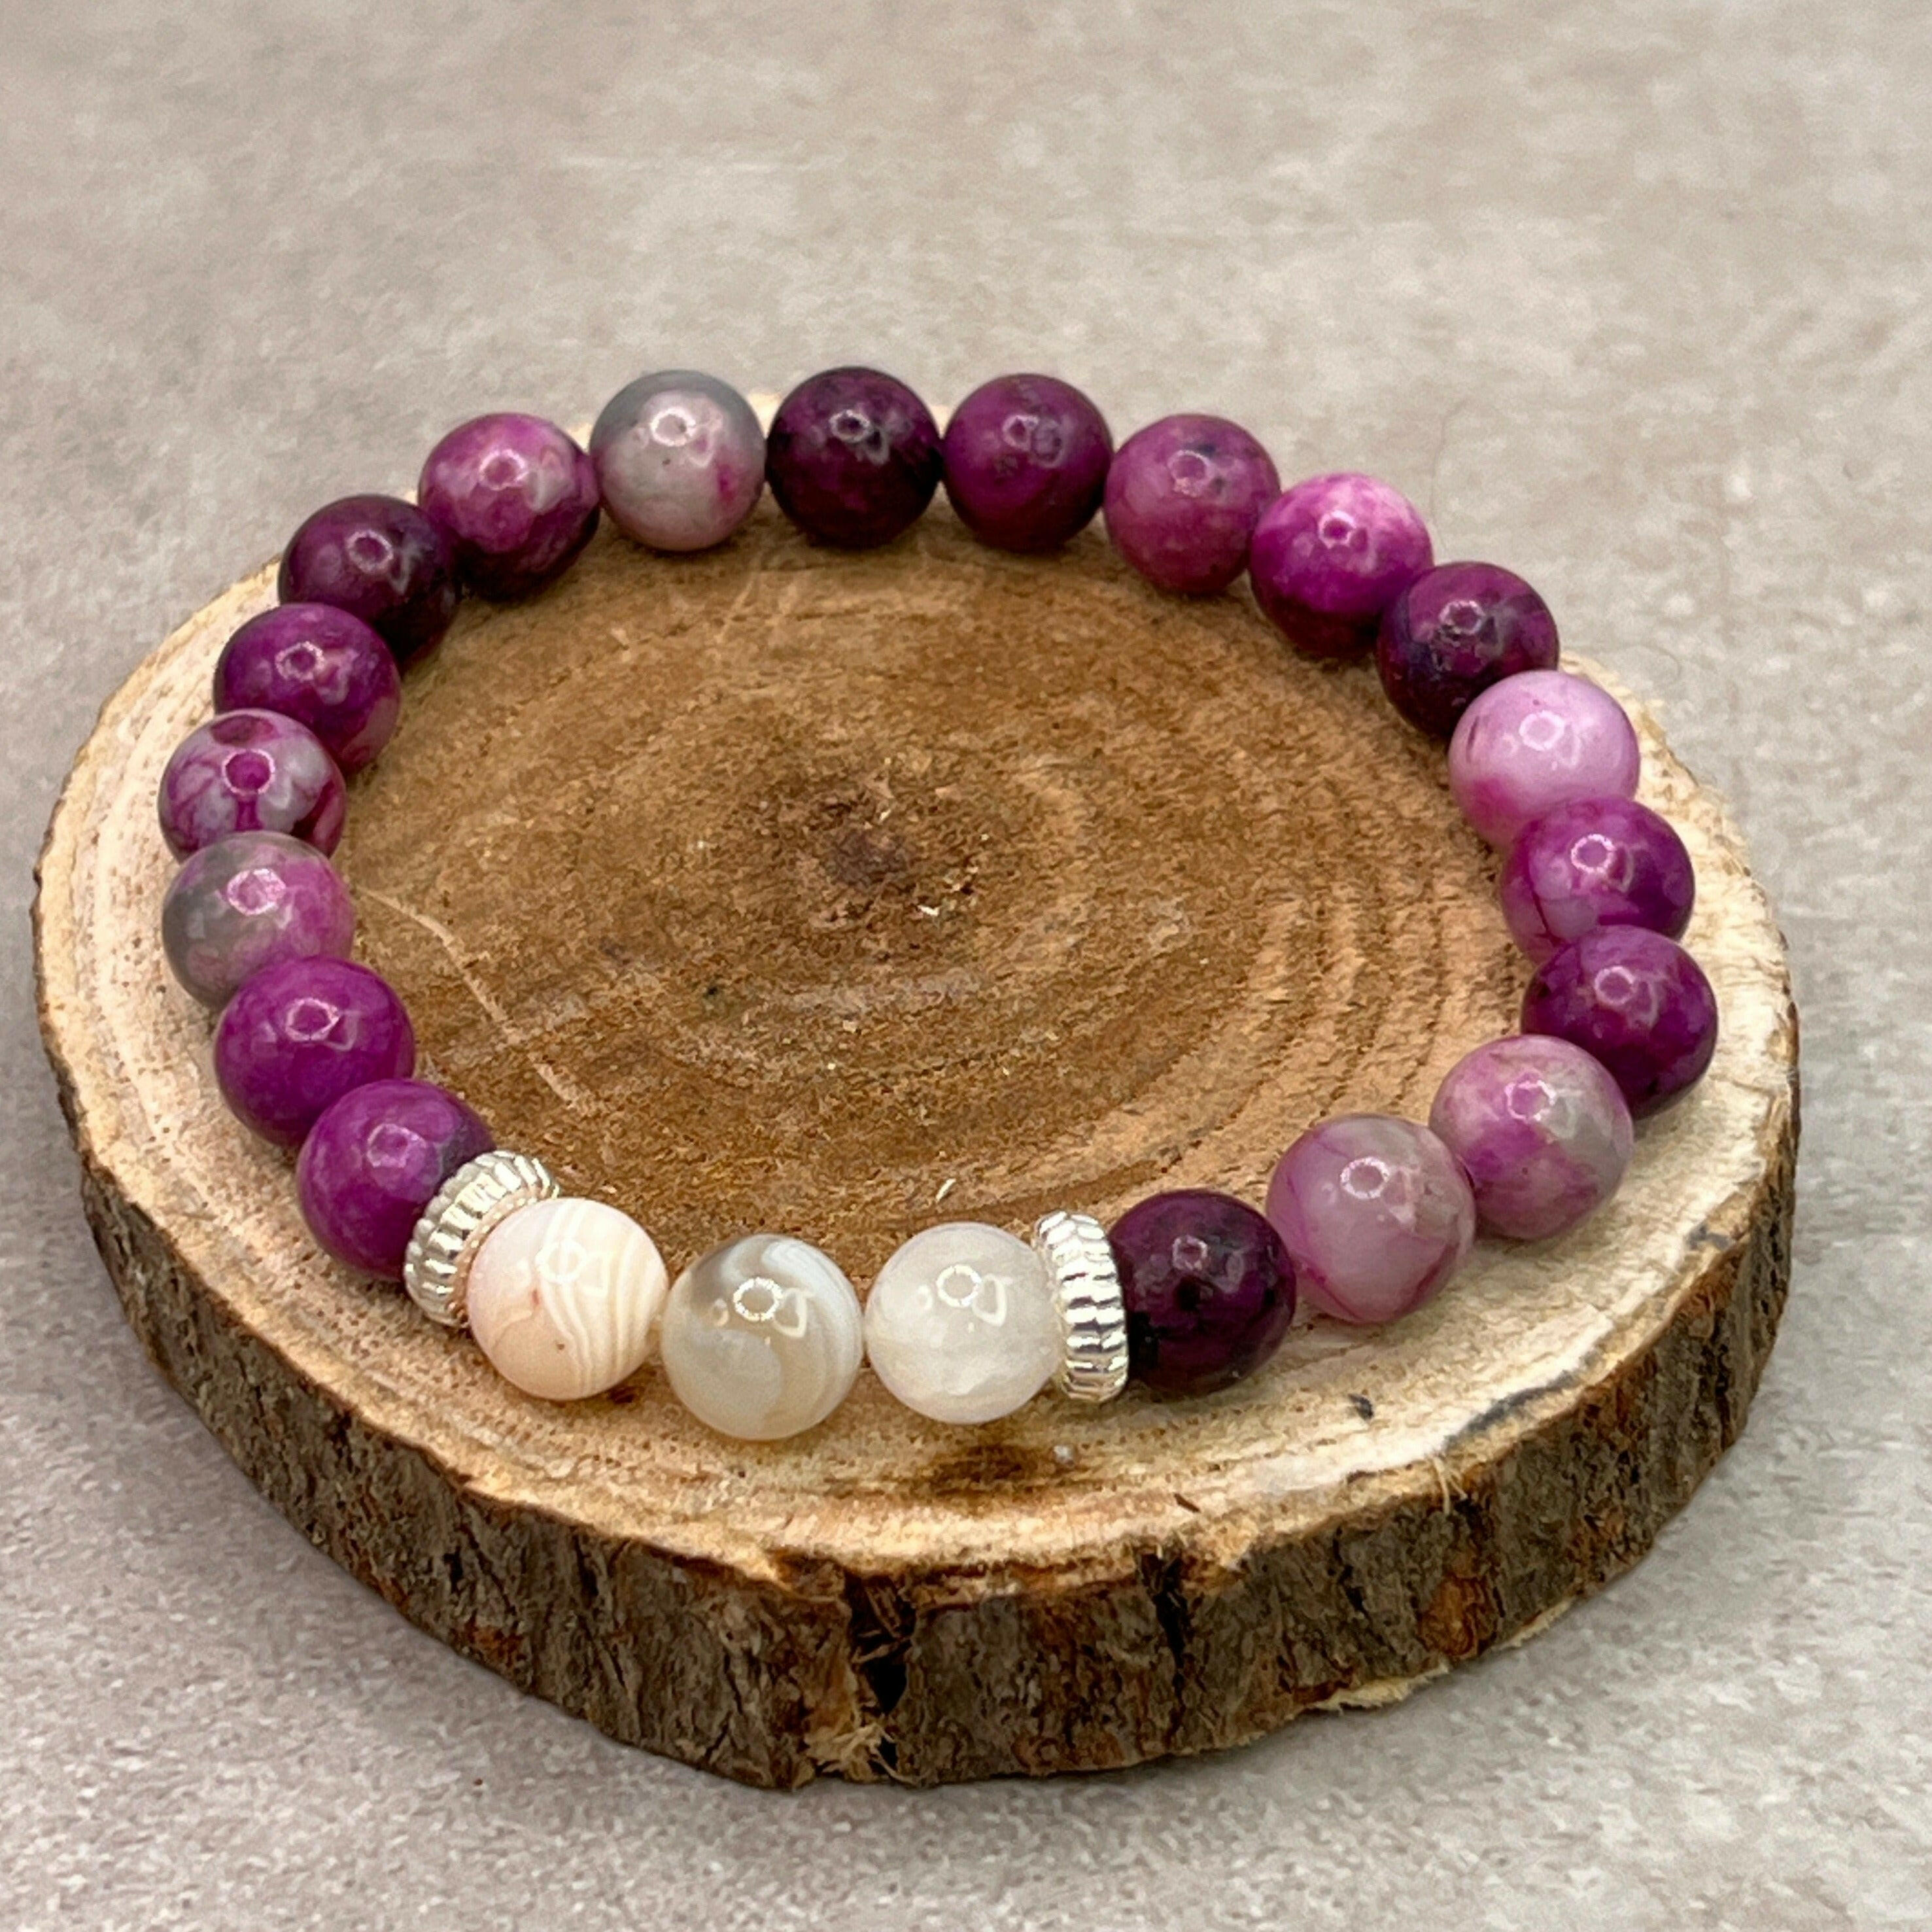 Bec Sue Jewelry Shop chakra bracelet 6.5 / purple / suiliter agate Luxurious One-of-a-Kind Sugilite and Agate 8mm Bead Bracelet - Unisex Sugilite Jewelry Tags 601